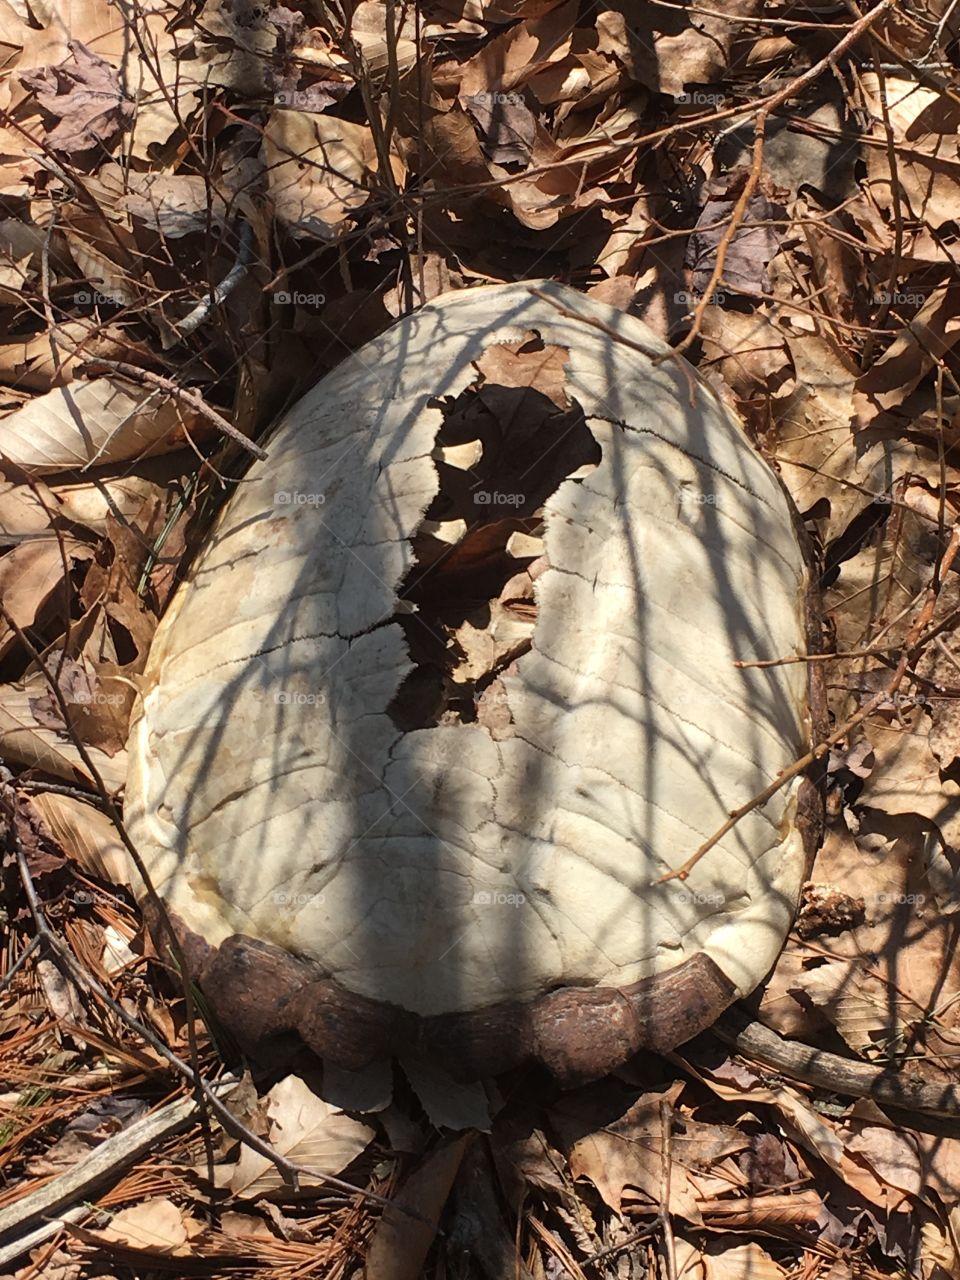 Turtle shell 